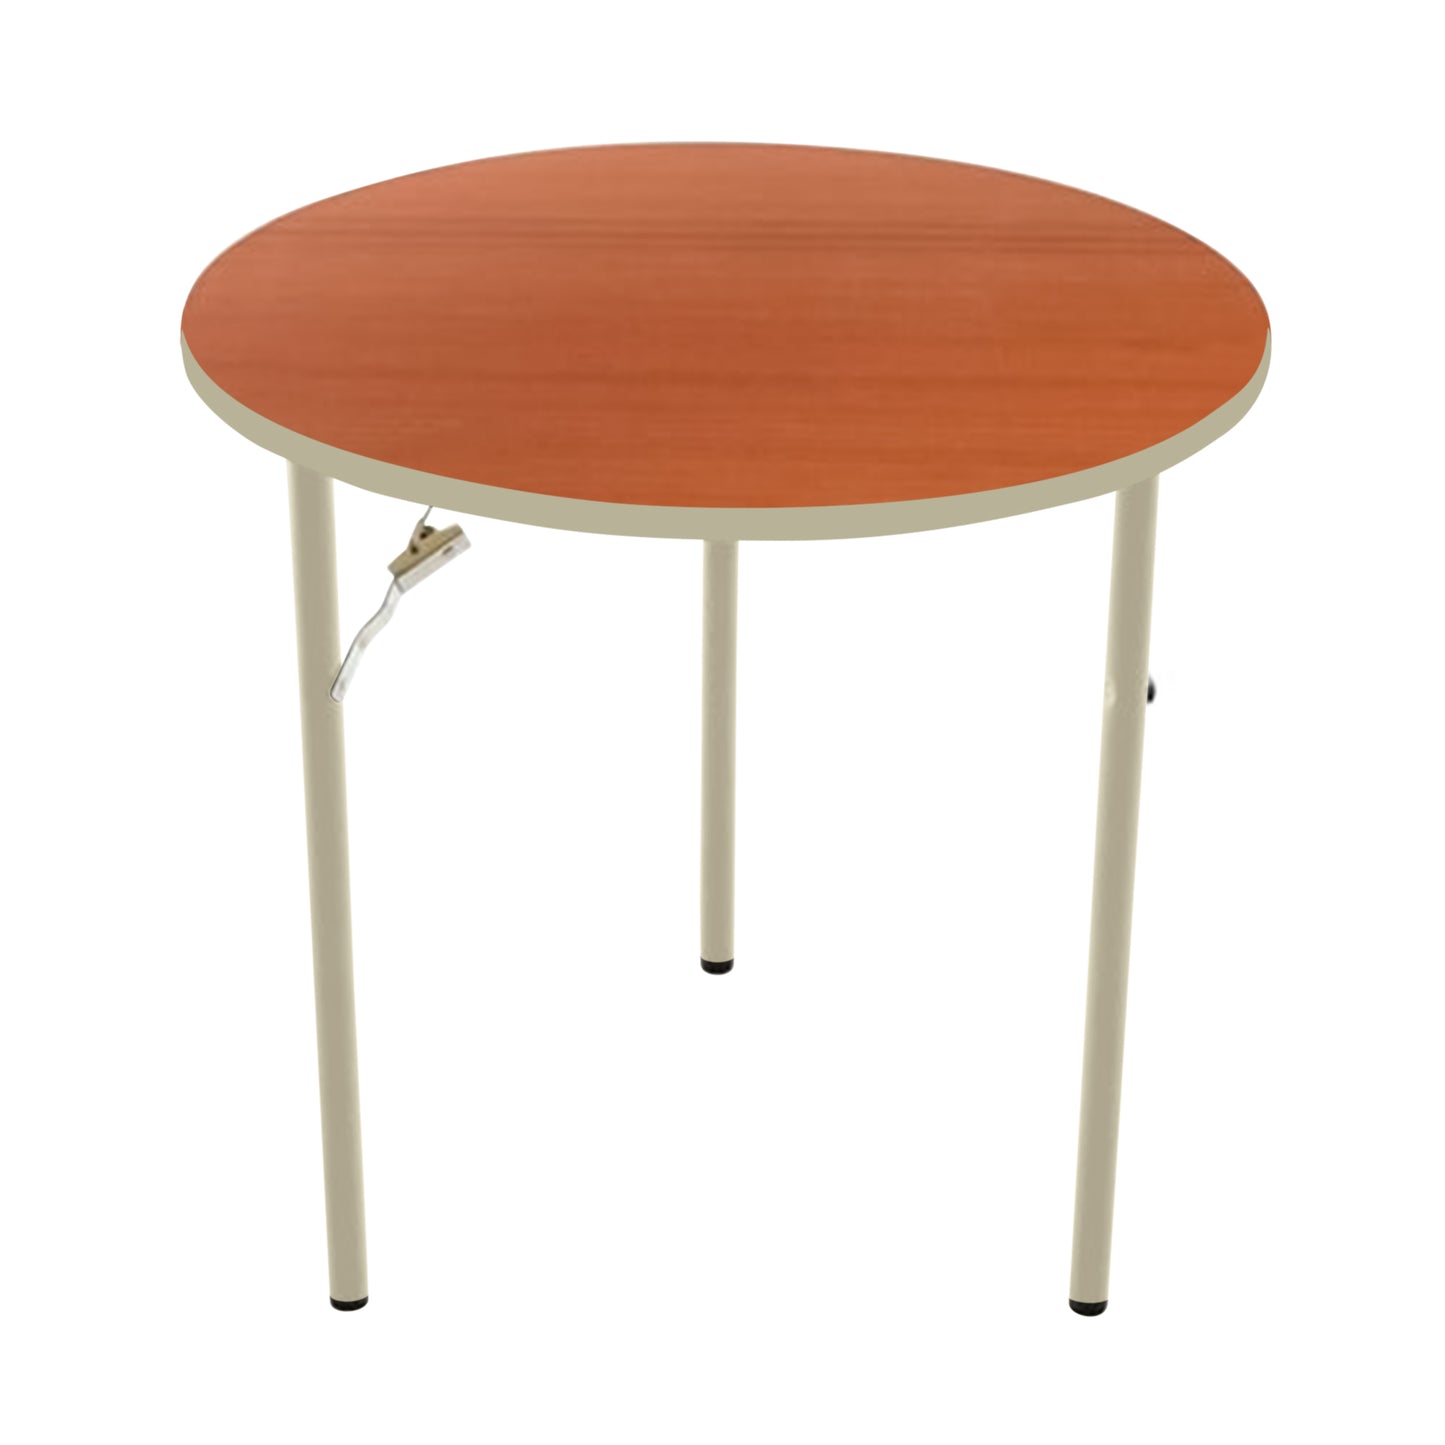 AmTab Folding Table - Plywood Stained and Sealed - Vinyl T-Molding Edge - Round - 66" Diameter x 29"H  (AmTab AMT-R66PM)